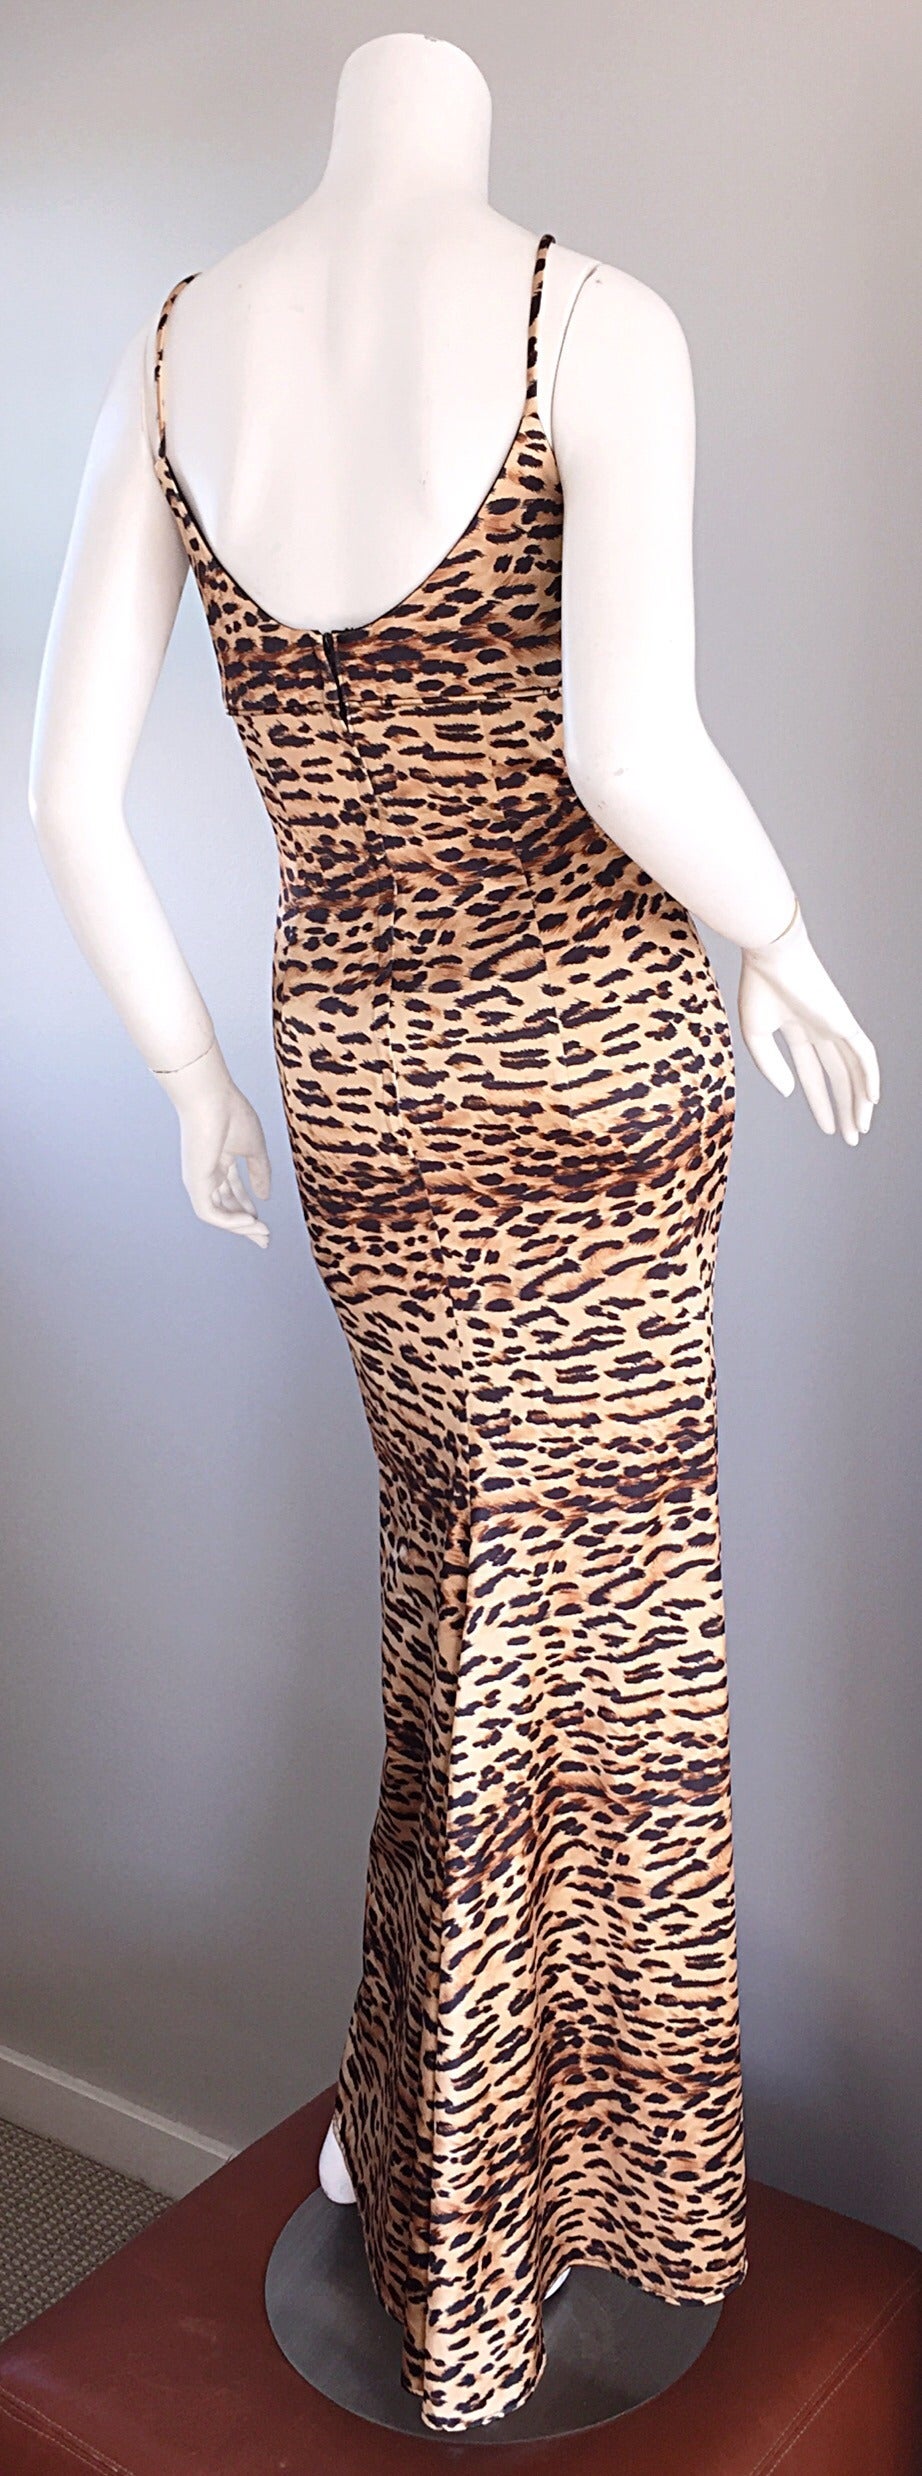 Iconic and Rare 1990s Dolce & Gabbana Leopard Print Vintage Bodycon Dress 2